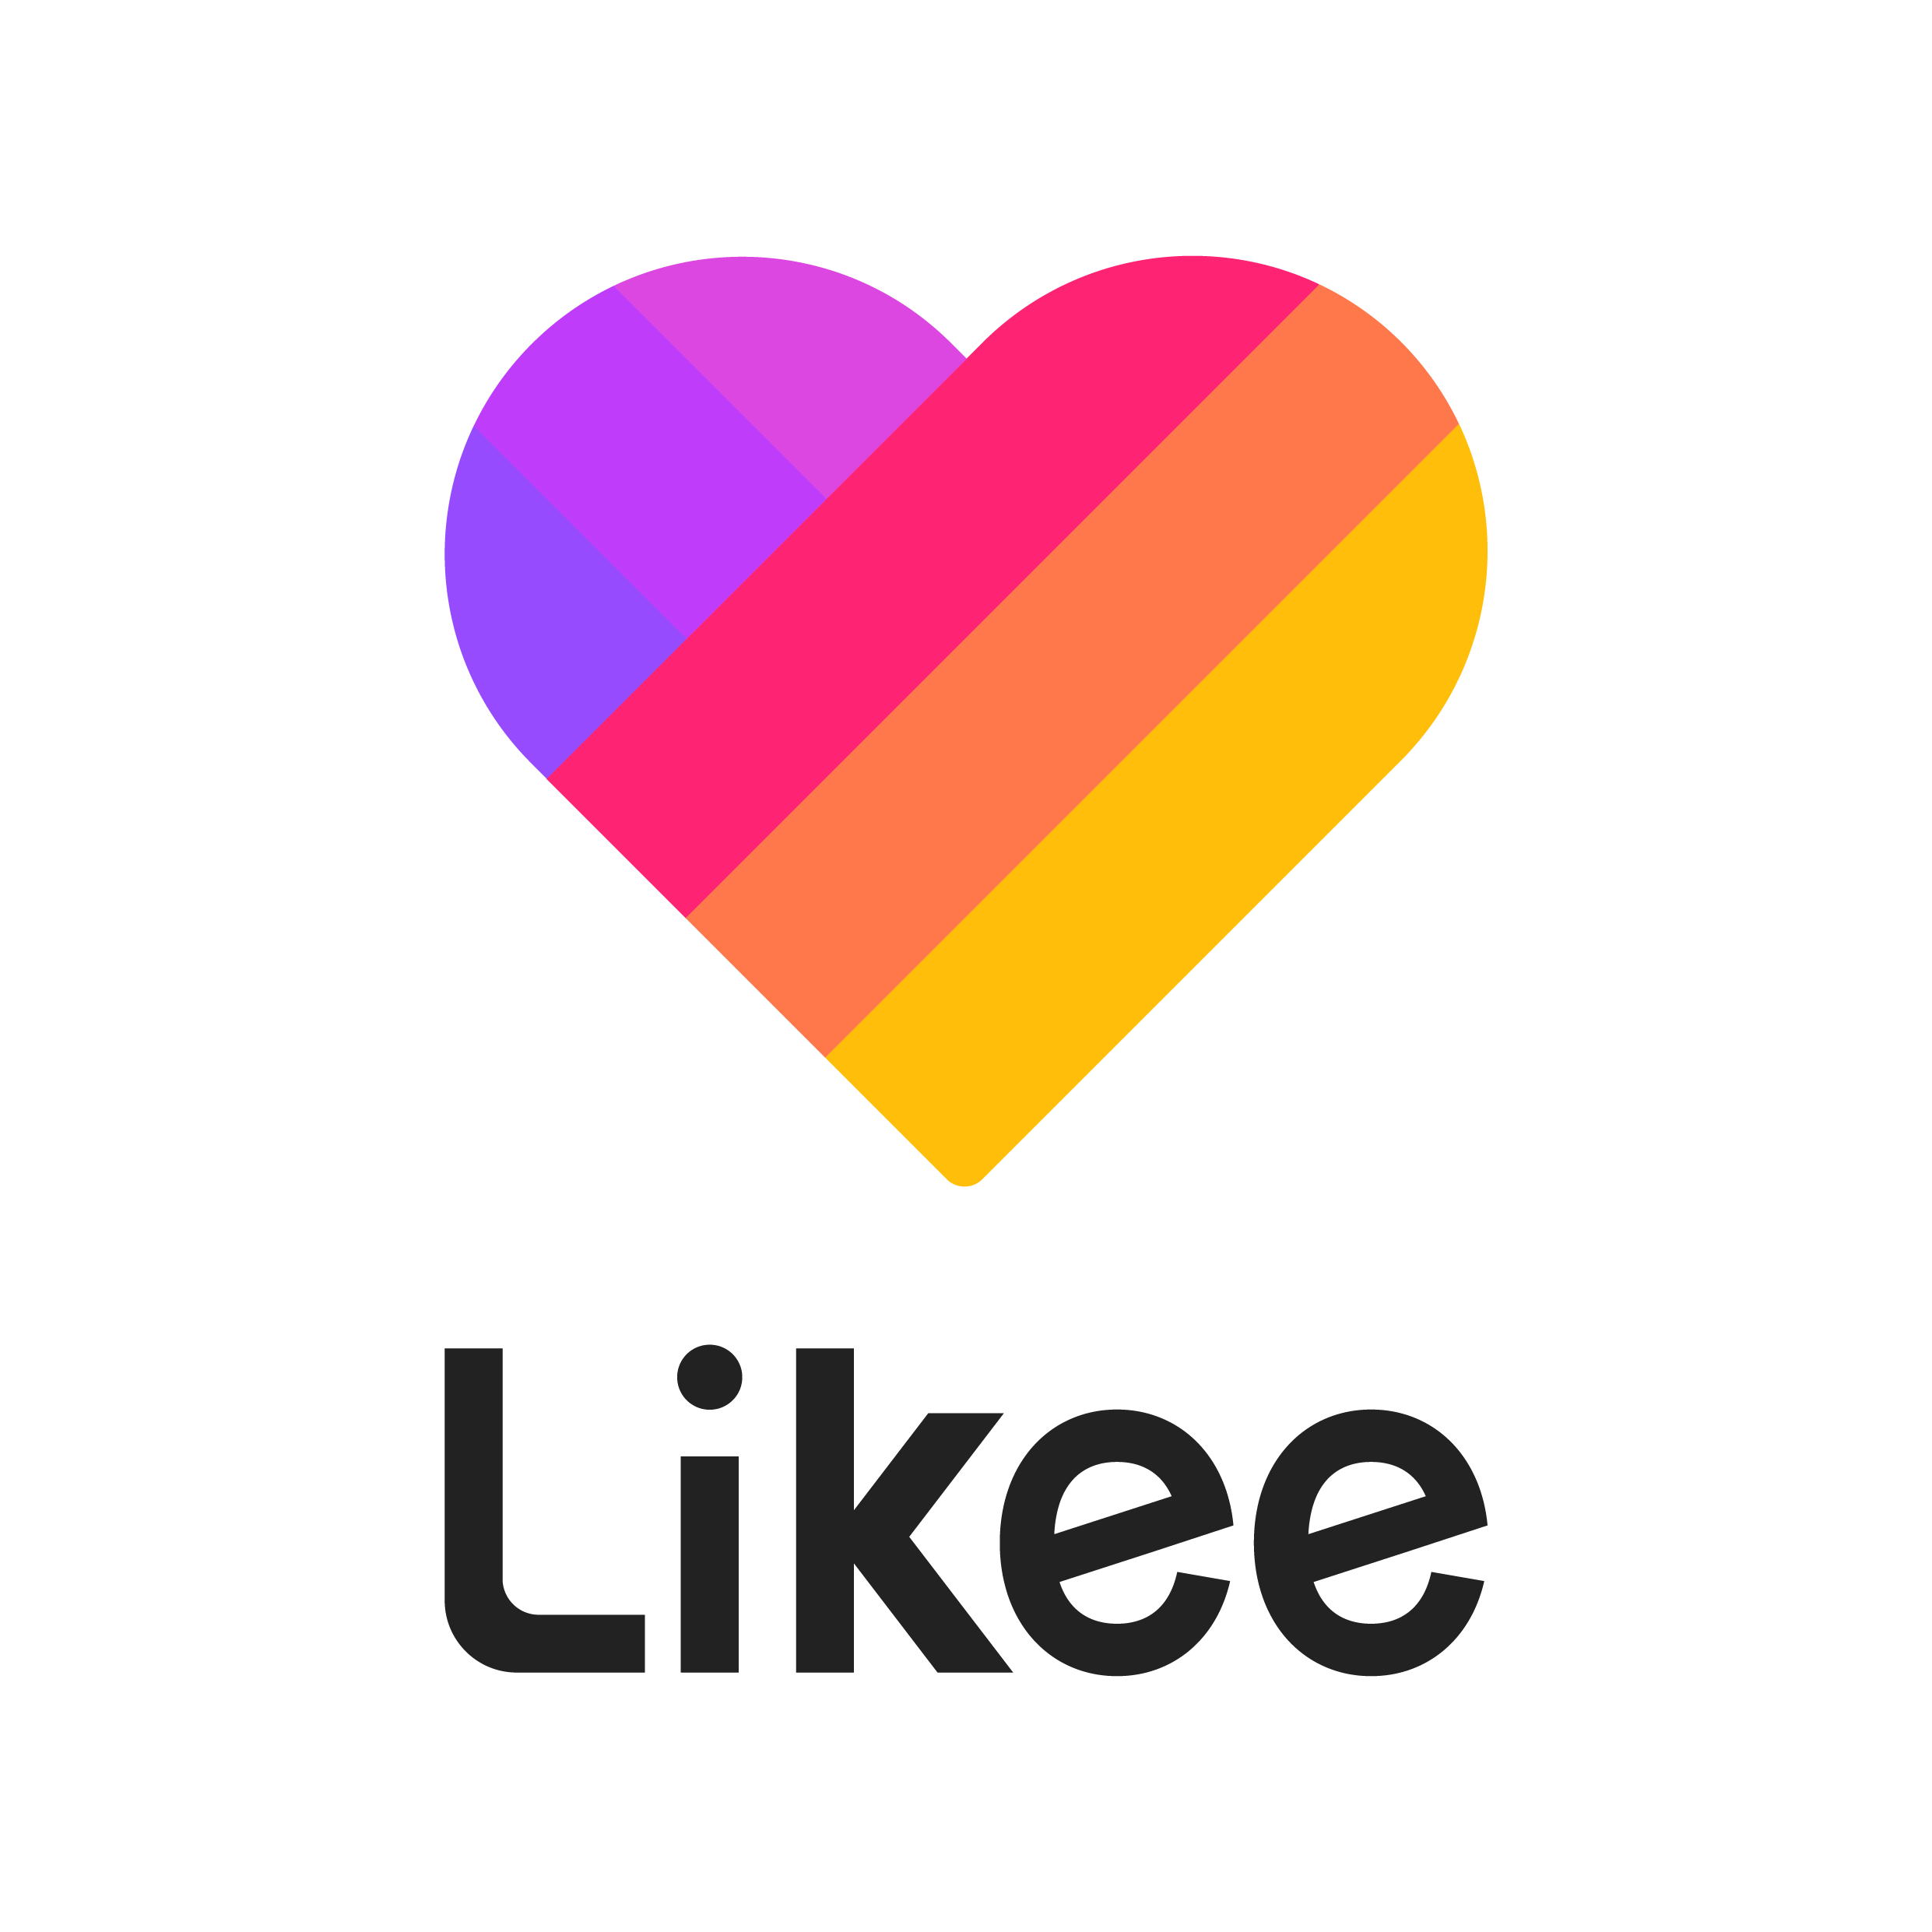 Likee will soon launch in the U.S. market, adding pressure to TikTok and Byte